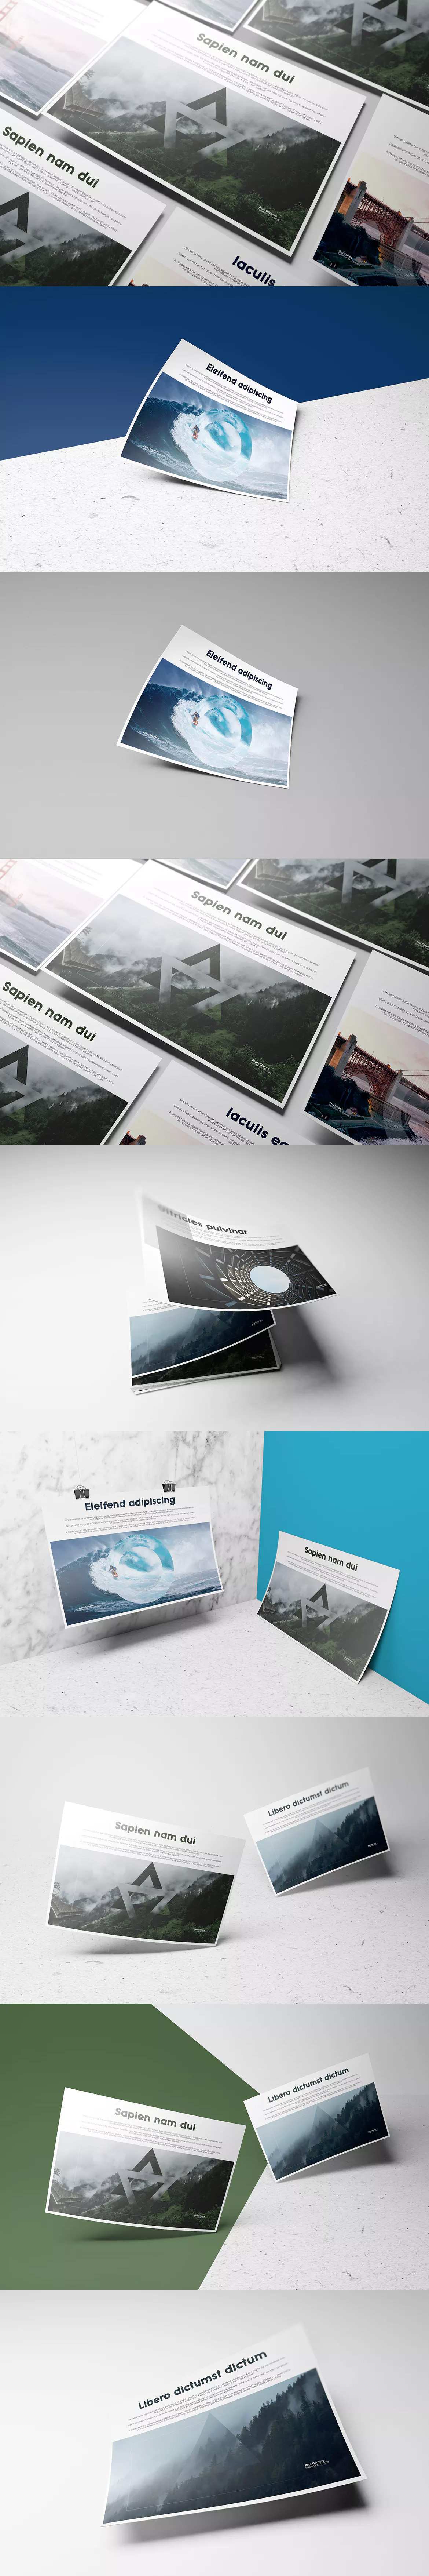 A4 A5 Horizontal Flyer Mockups By Wutip On Envato Elements Flyer Mockup Mockup Flyer